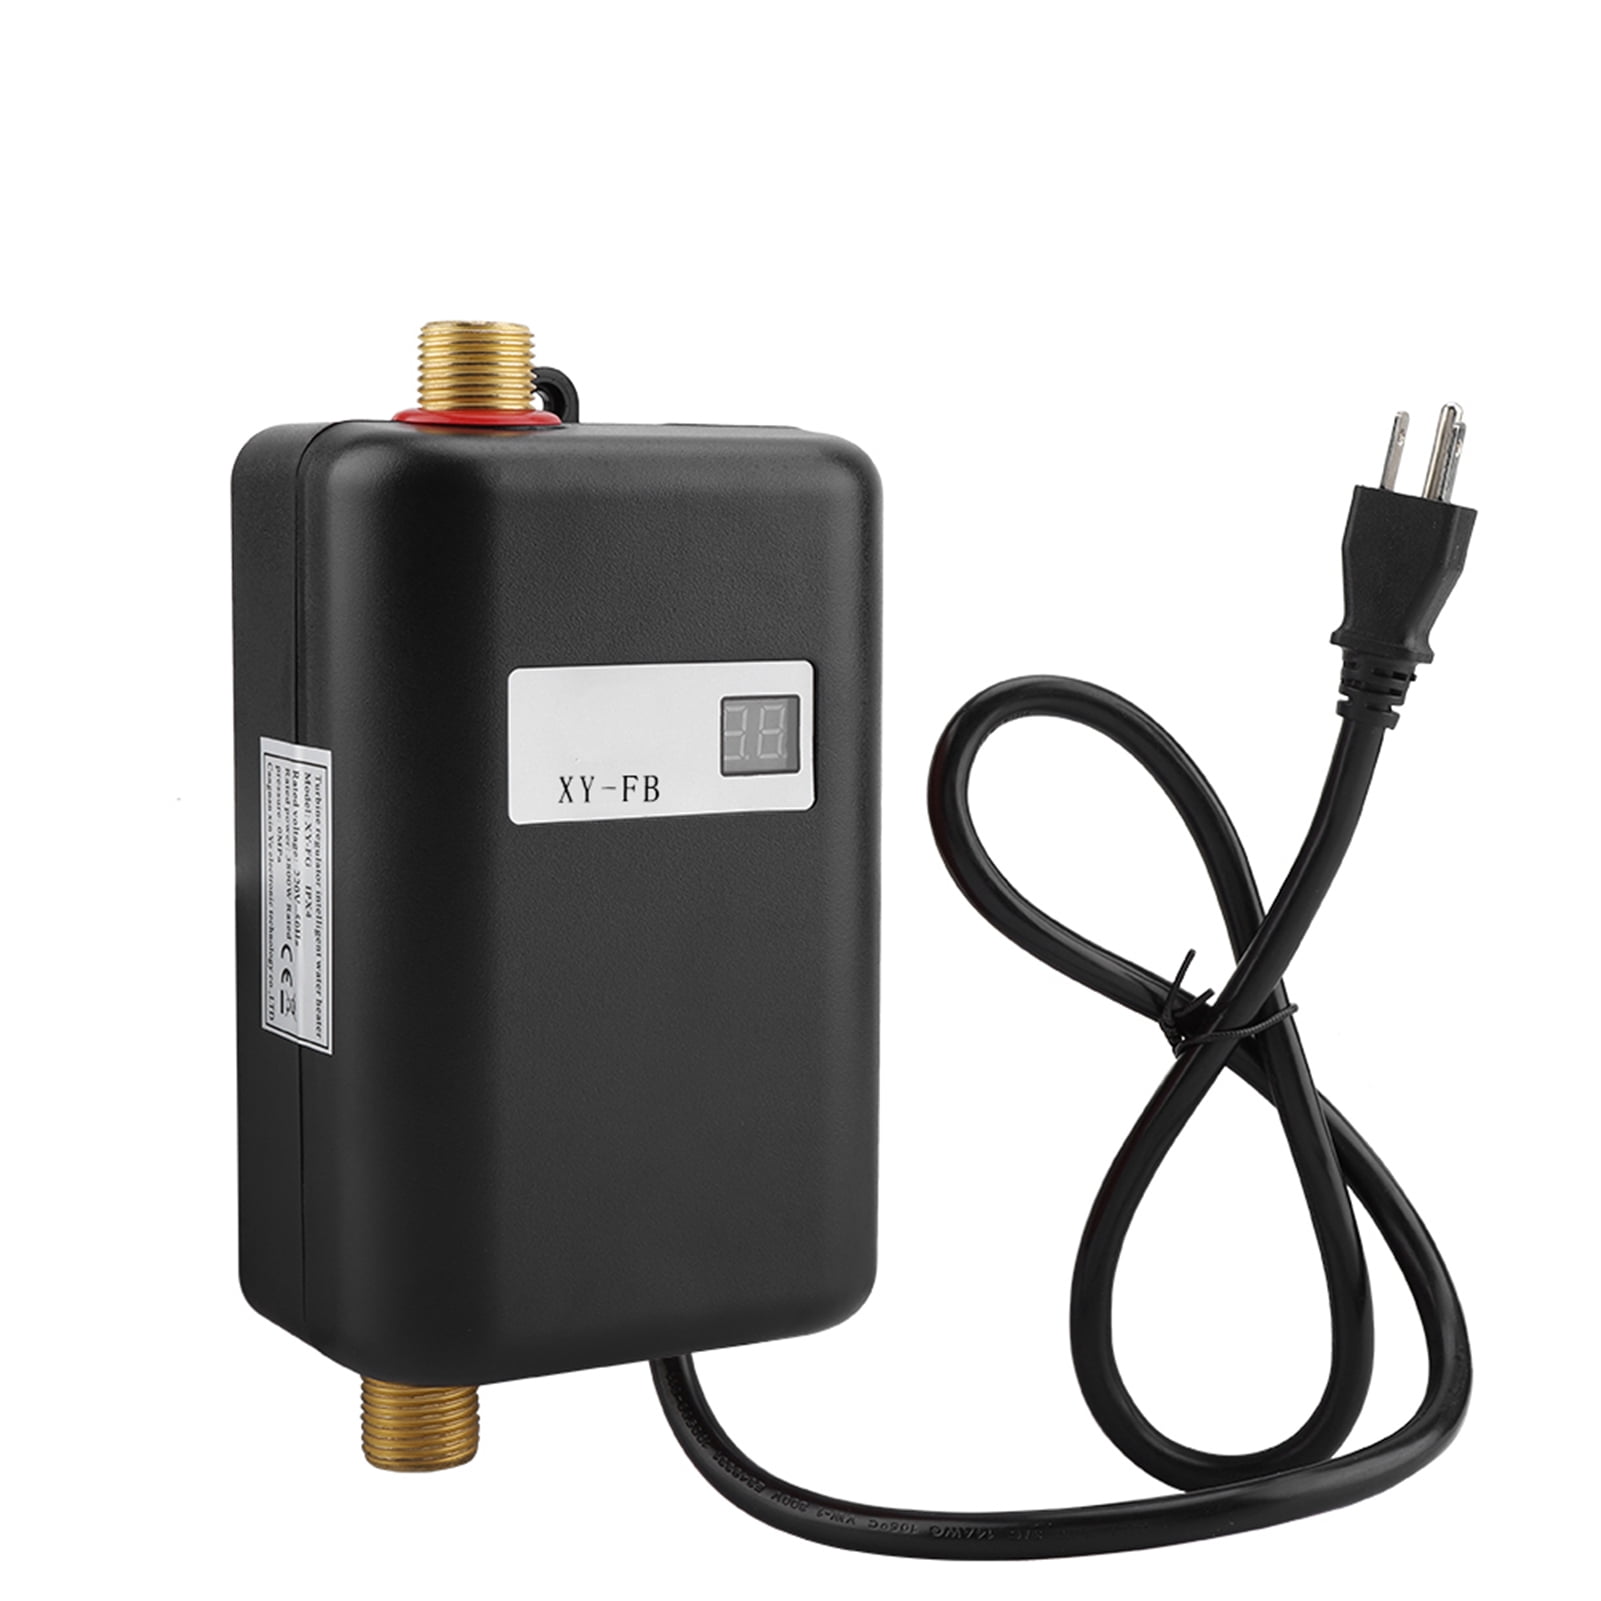 3000W Instantaneous Storage-free Hot Water Electric Water Heater with EU Plug 